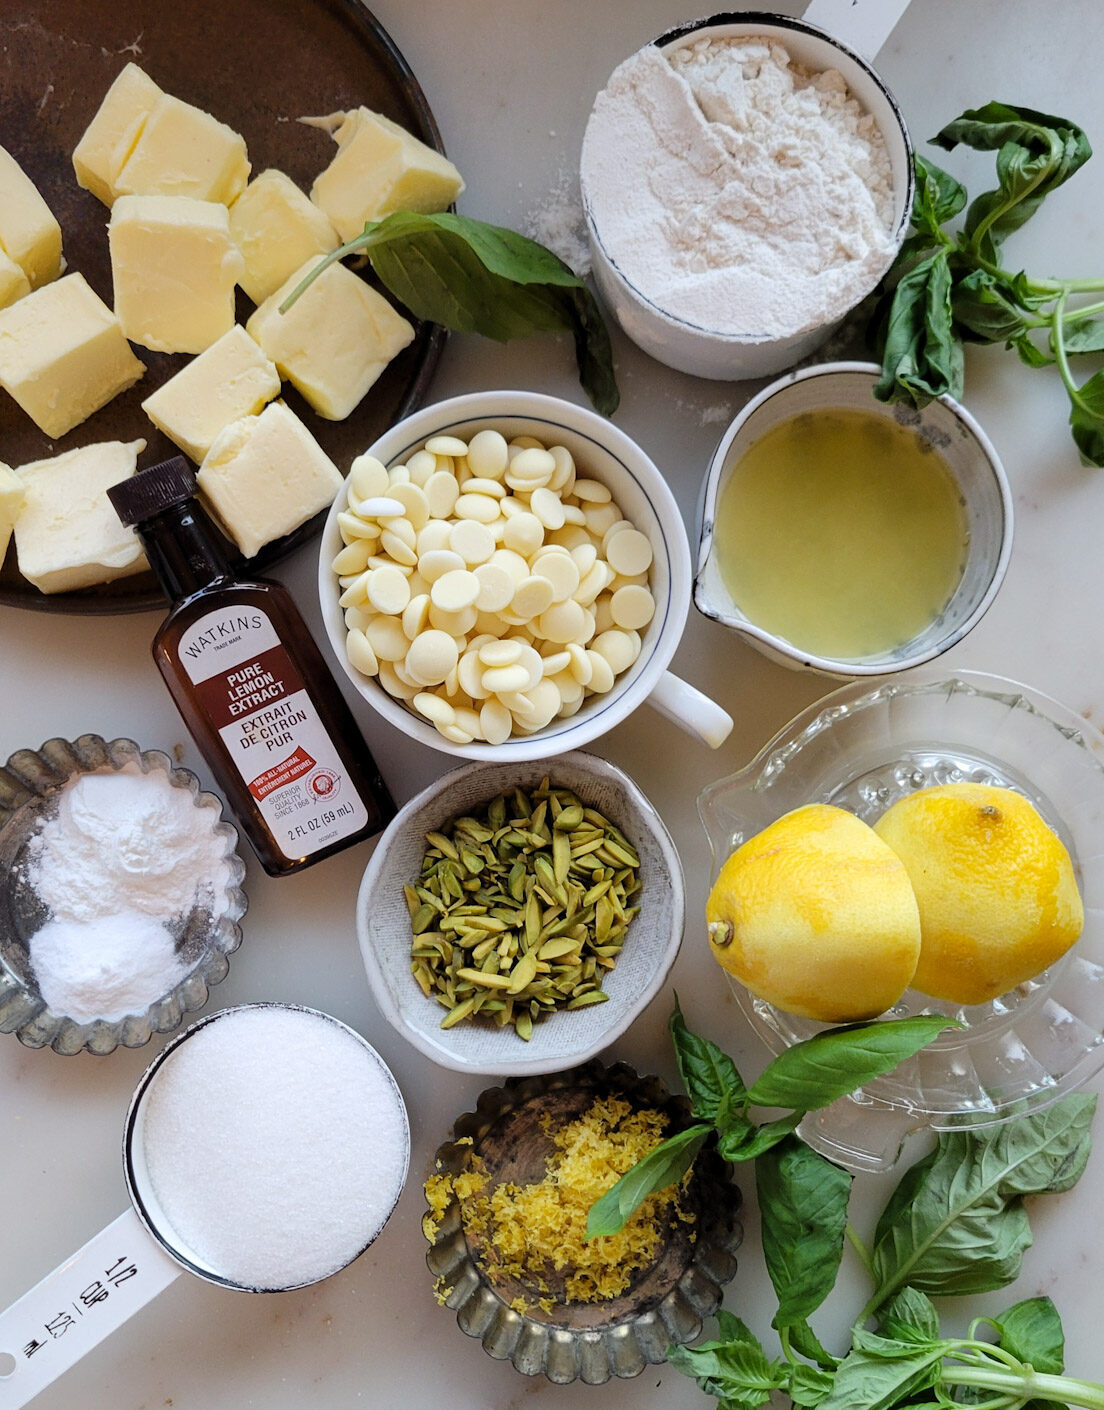 Ingredients for making Lemon Basil Cookies with White Chocolate and Pistachios are spread out on the counter.